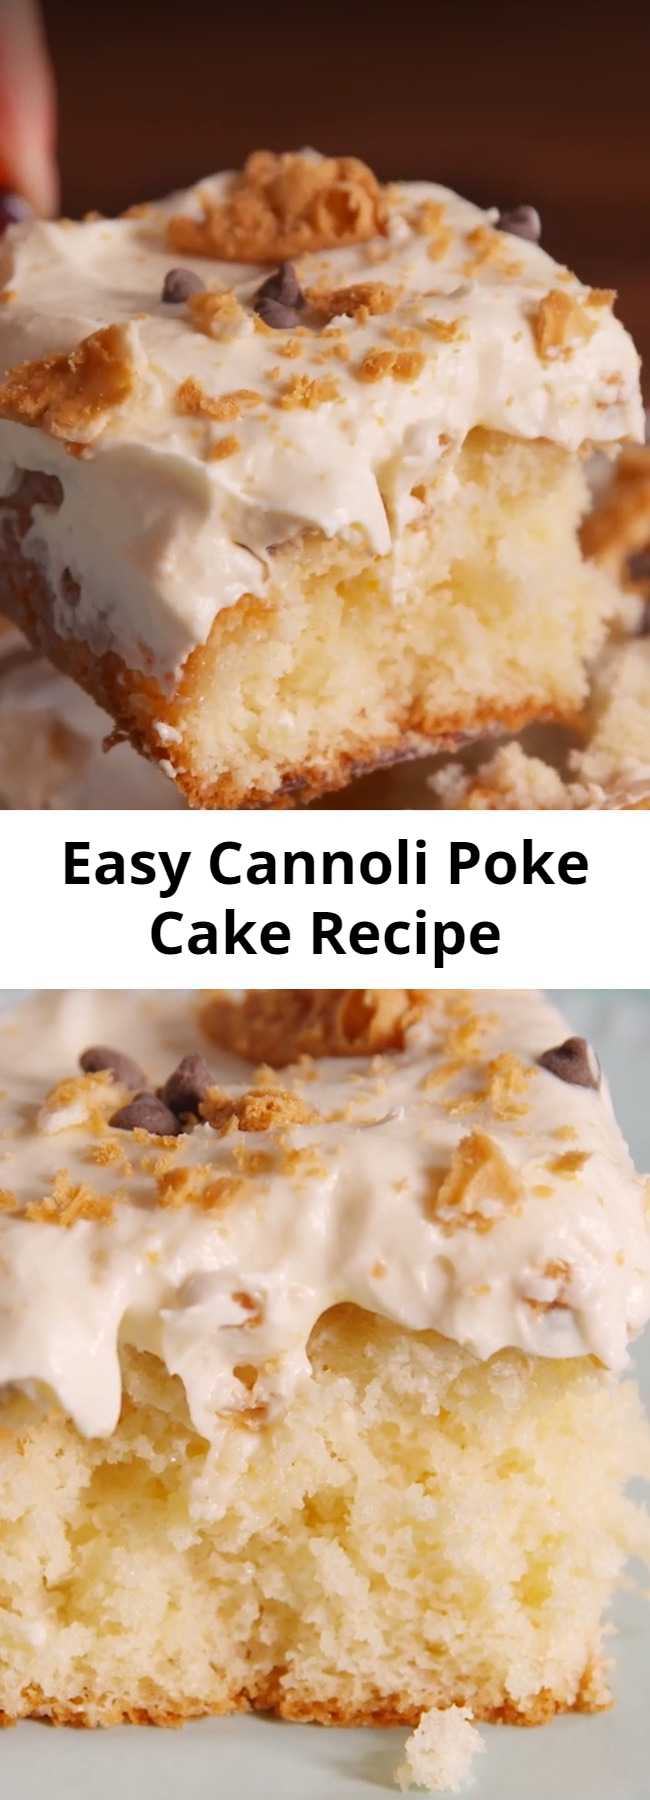 Easy Cannoli Poke Cake Recipe - Cannoli poke cake is the feed-a-crowd way to serve cannoli. Cannoli is breaking out of its shell and we aren't mad about it.